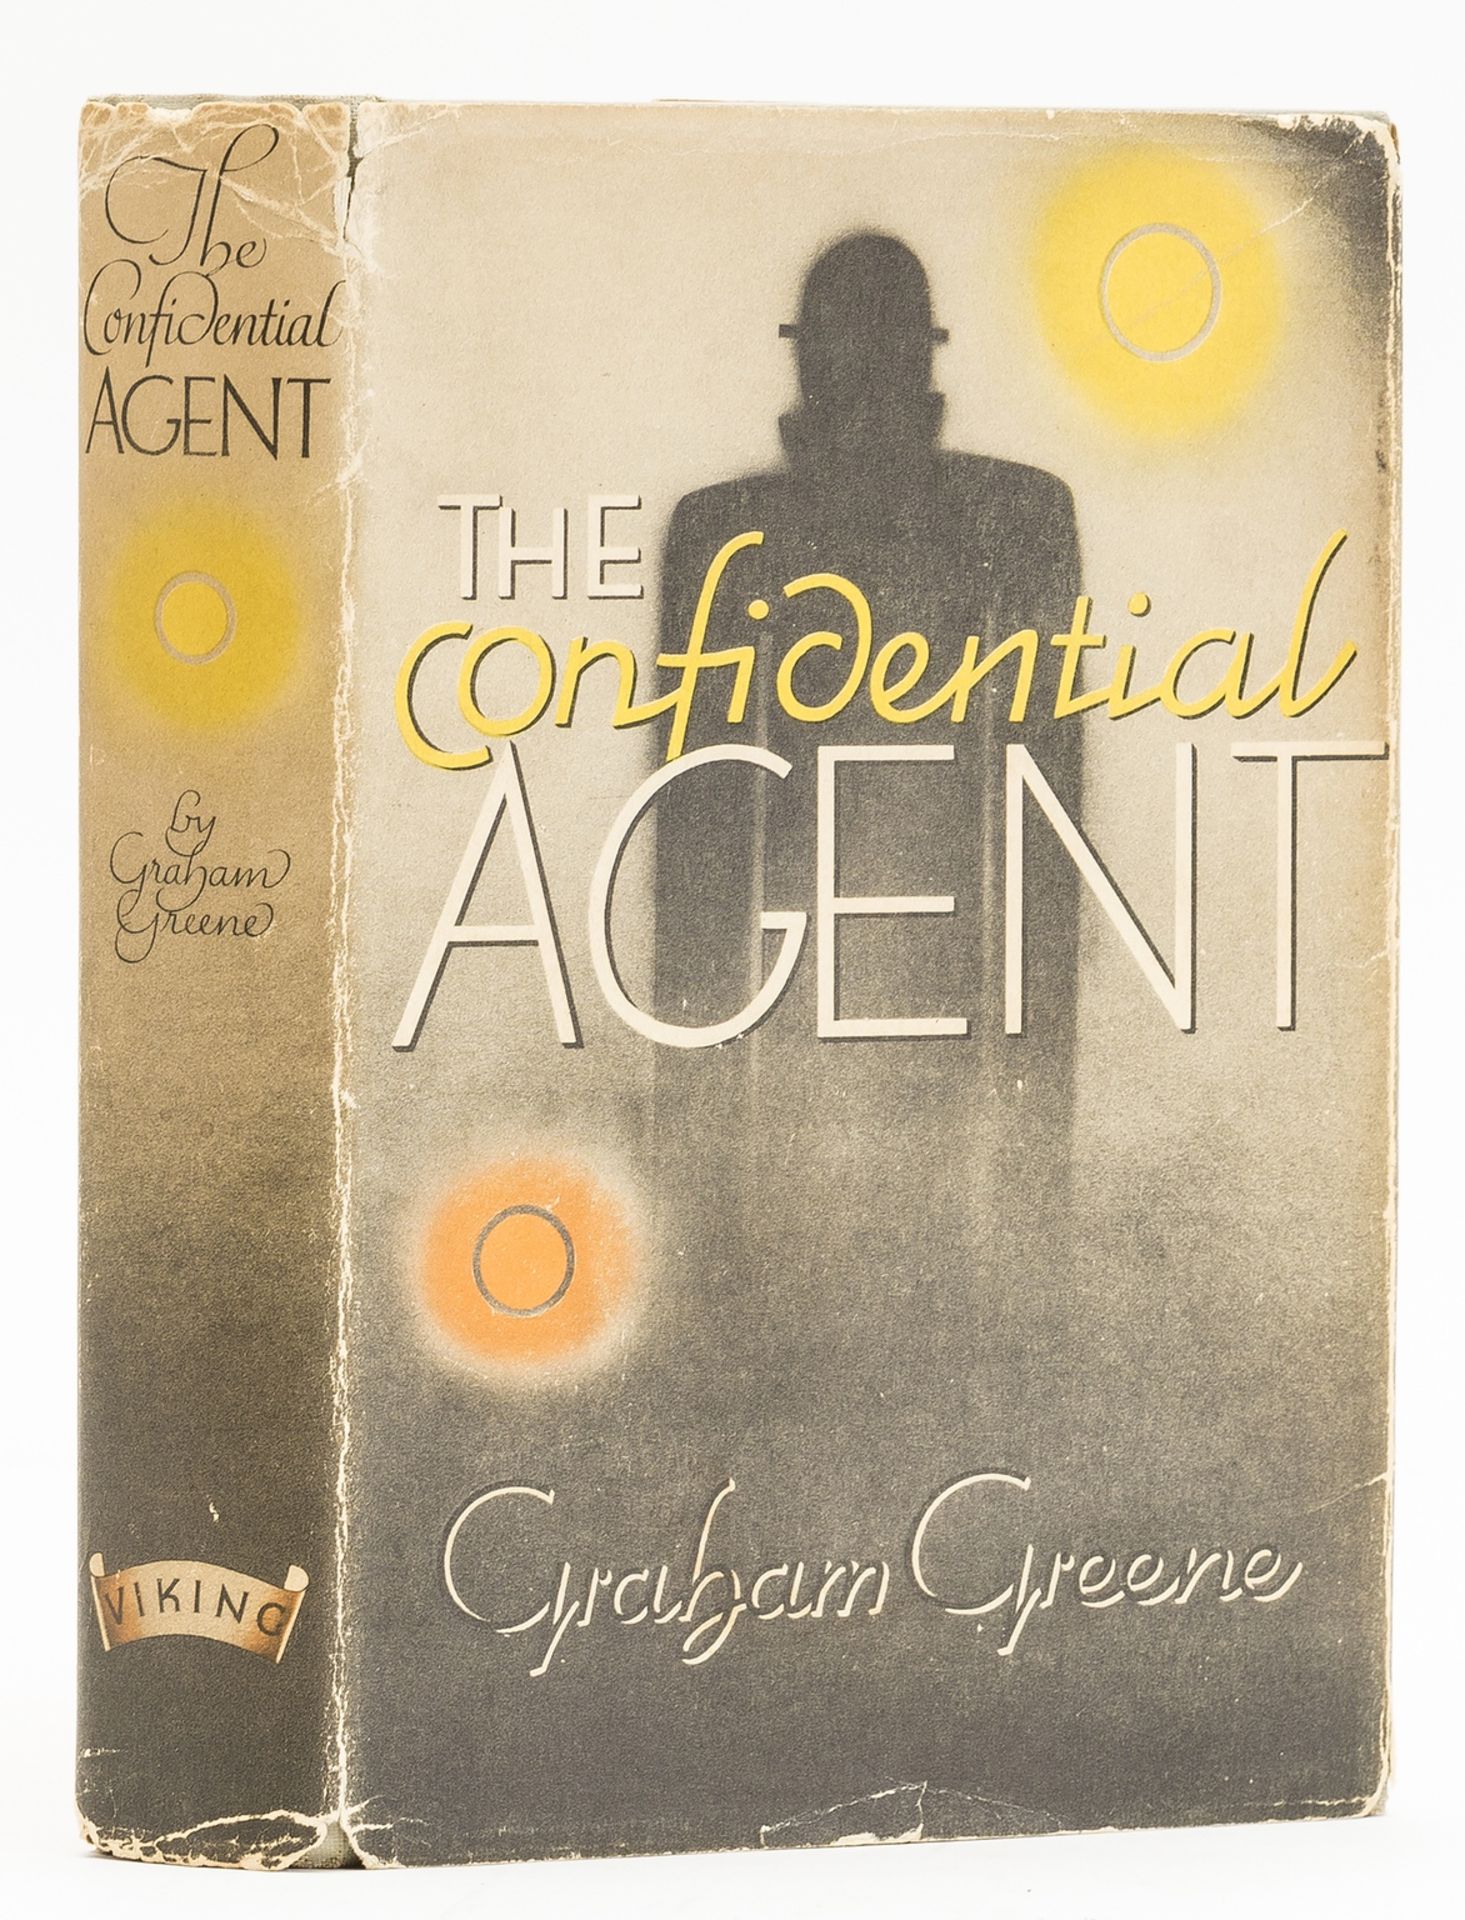 Greene (Graham) The Confidential Agent, first American edition, New York, 1939.